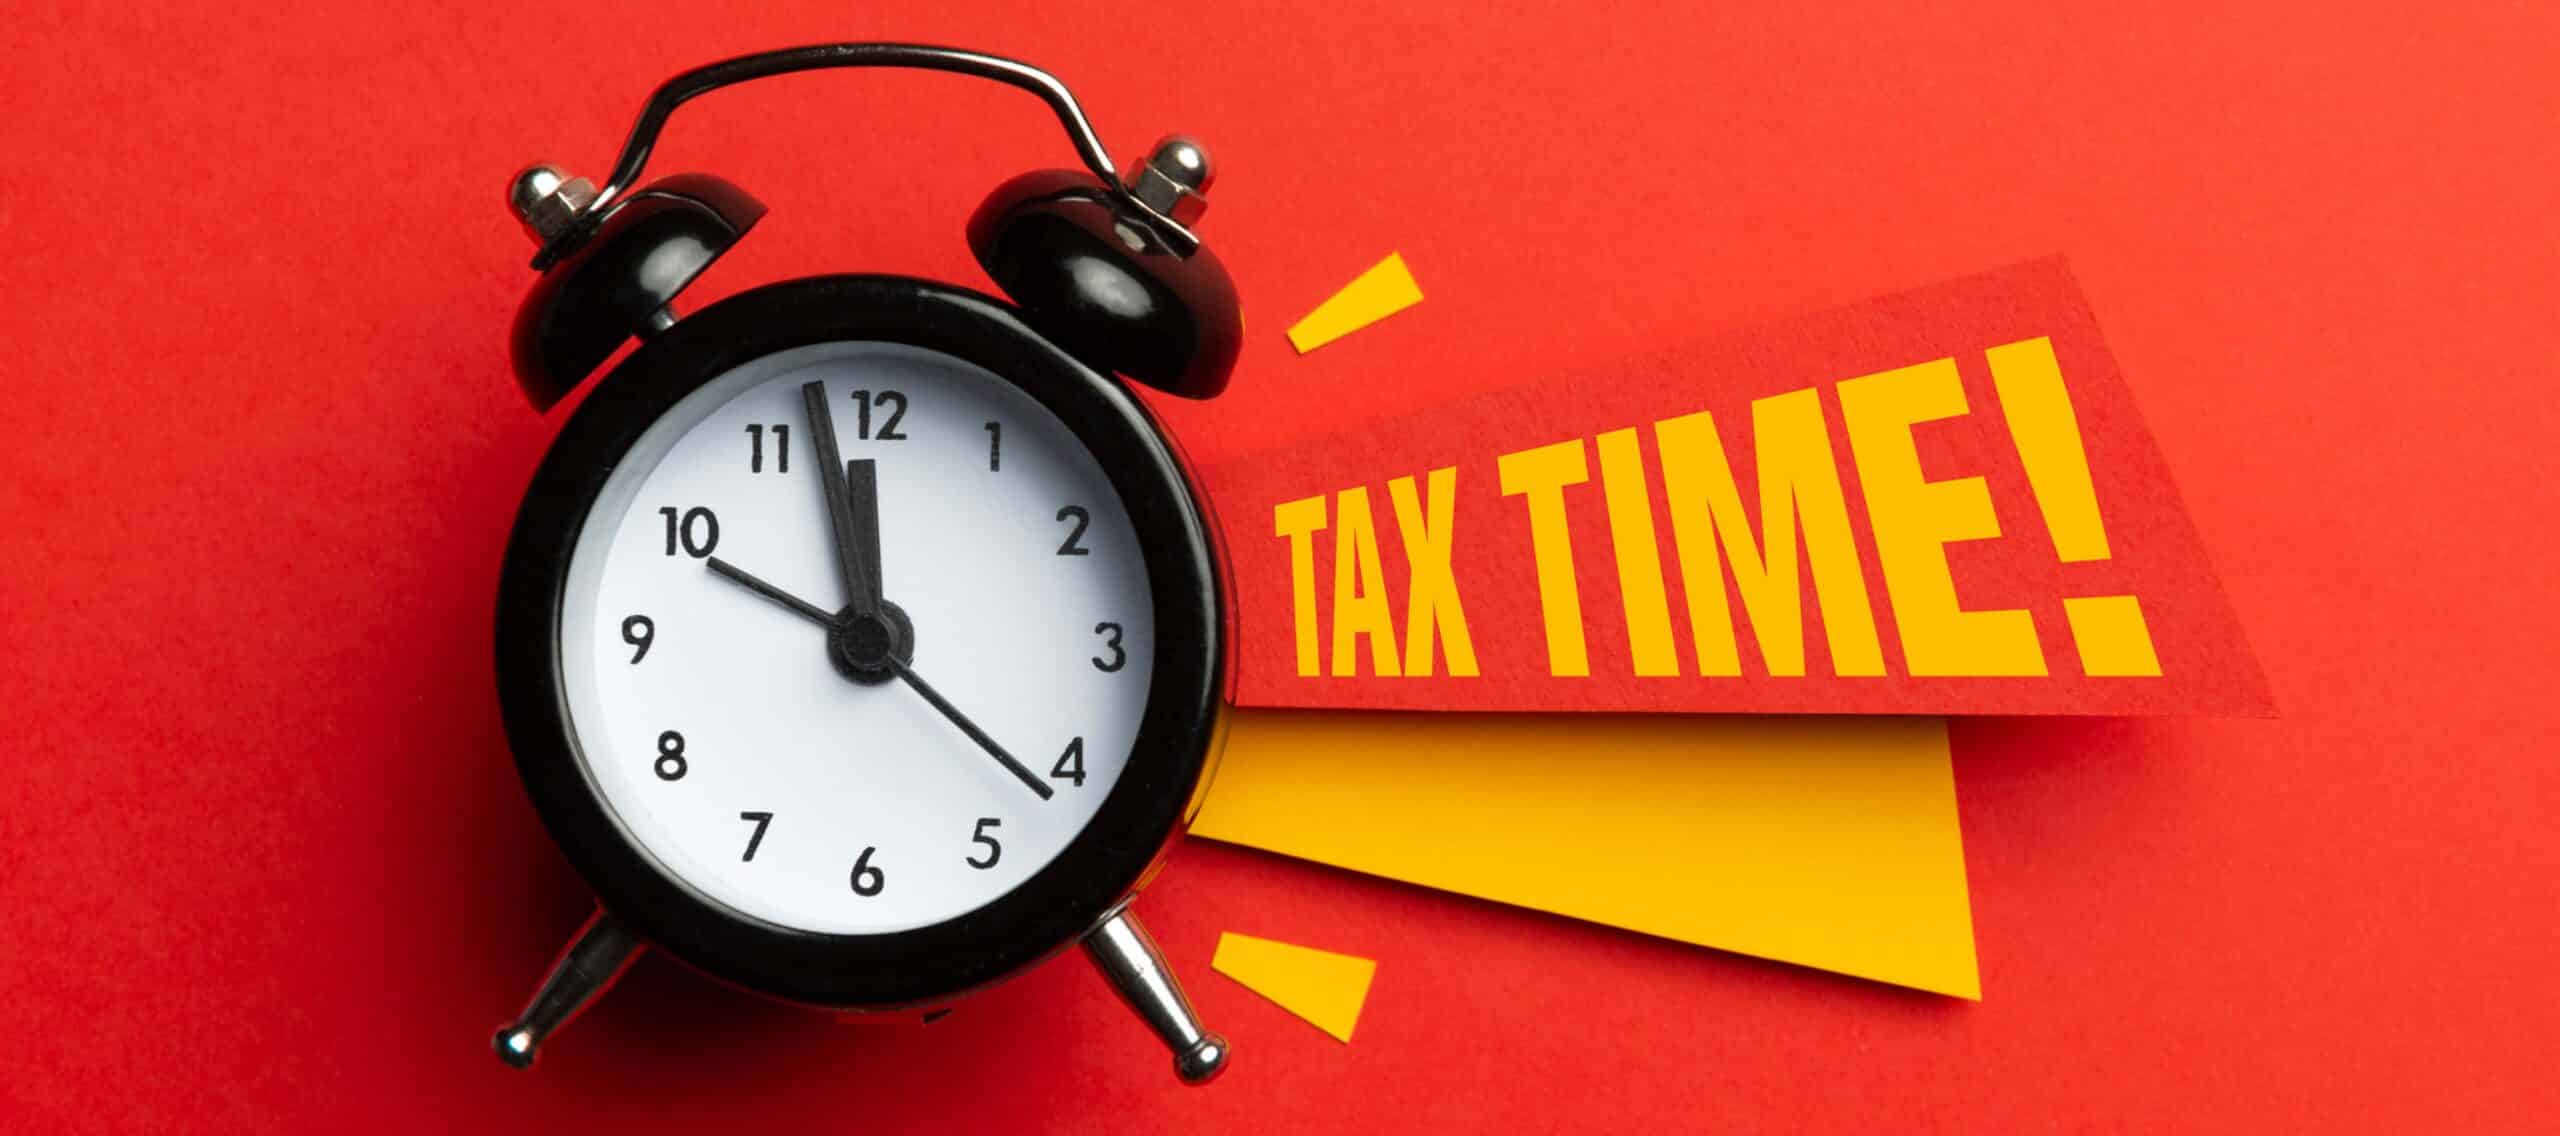 Alarm Clock with Tax Time! written by it. Article title: Tax Center